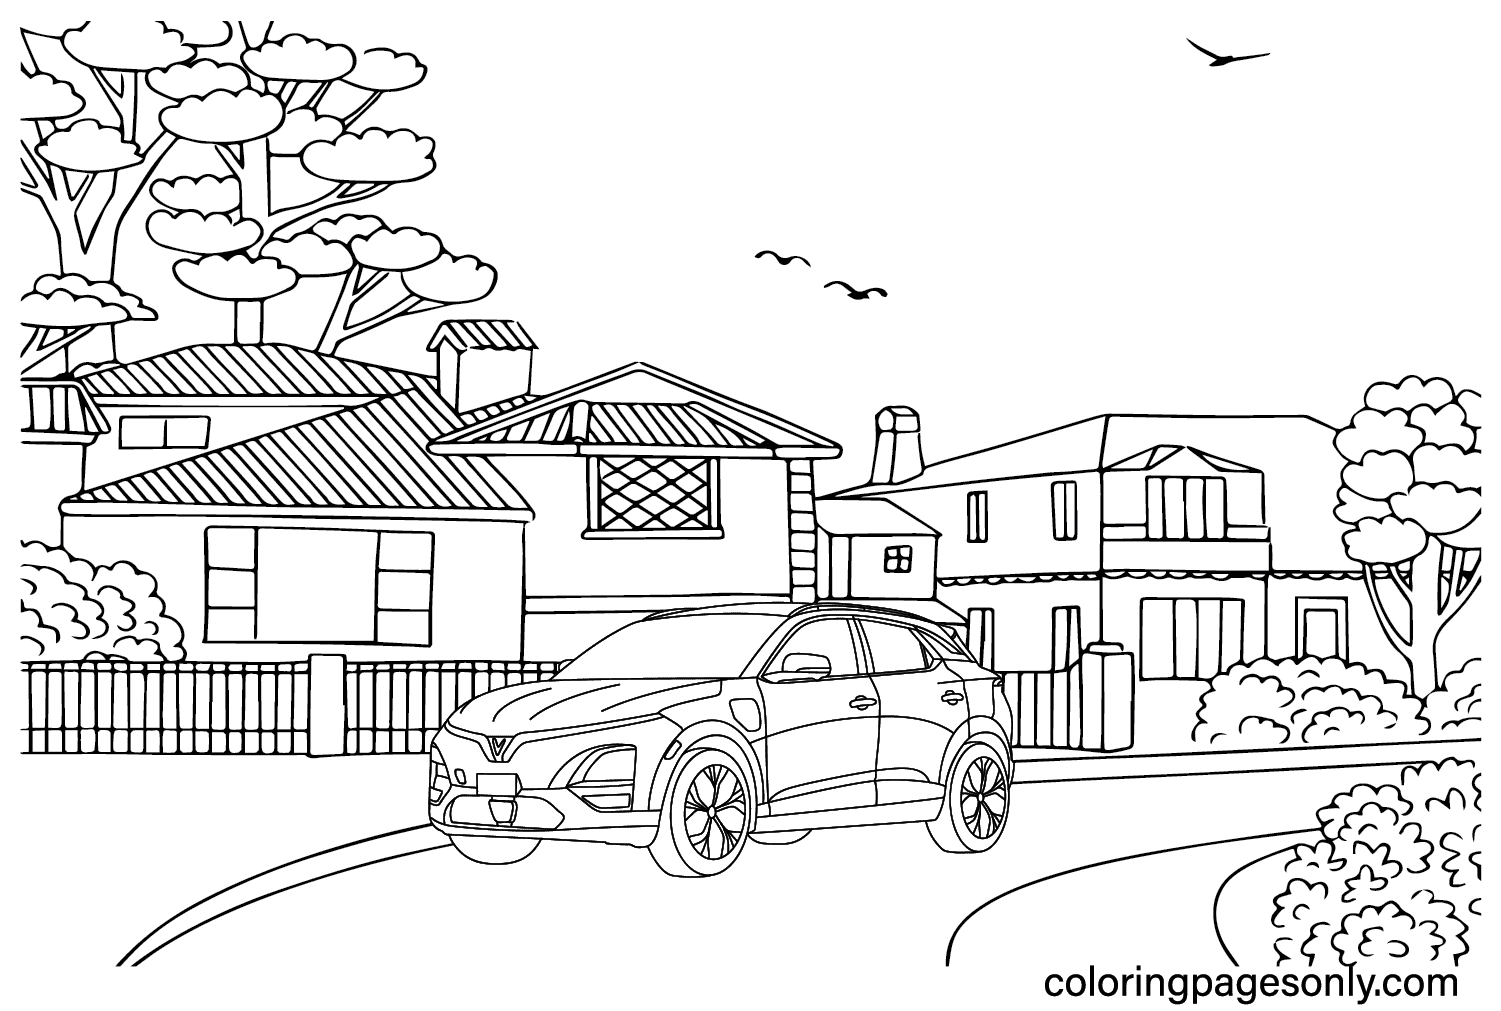 Vinfast VF6 Coloring Page from VinFast